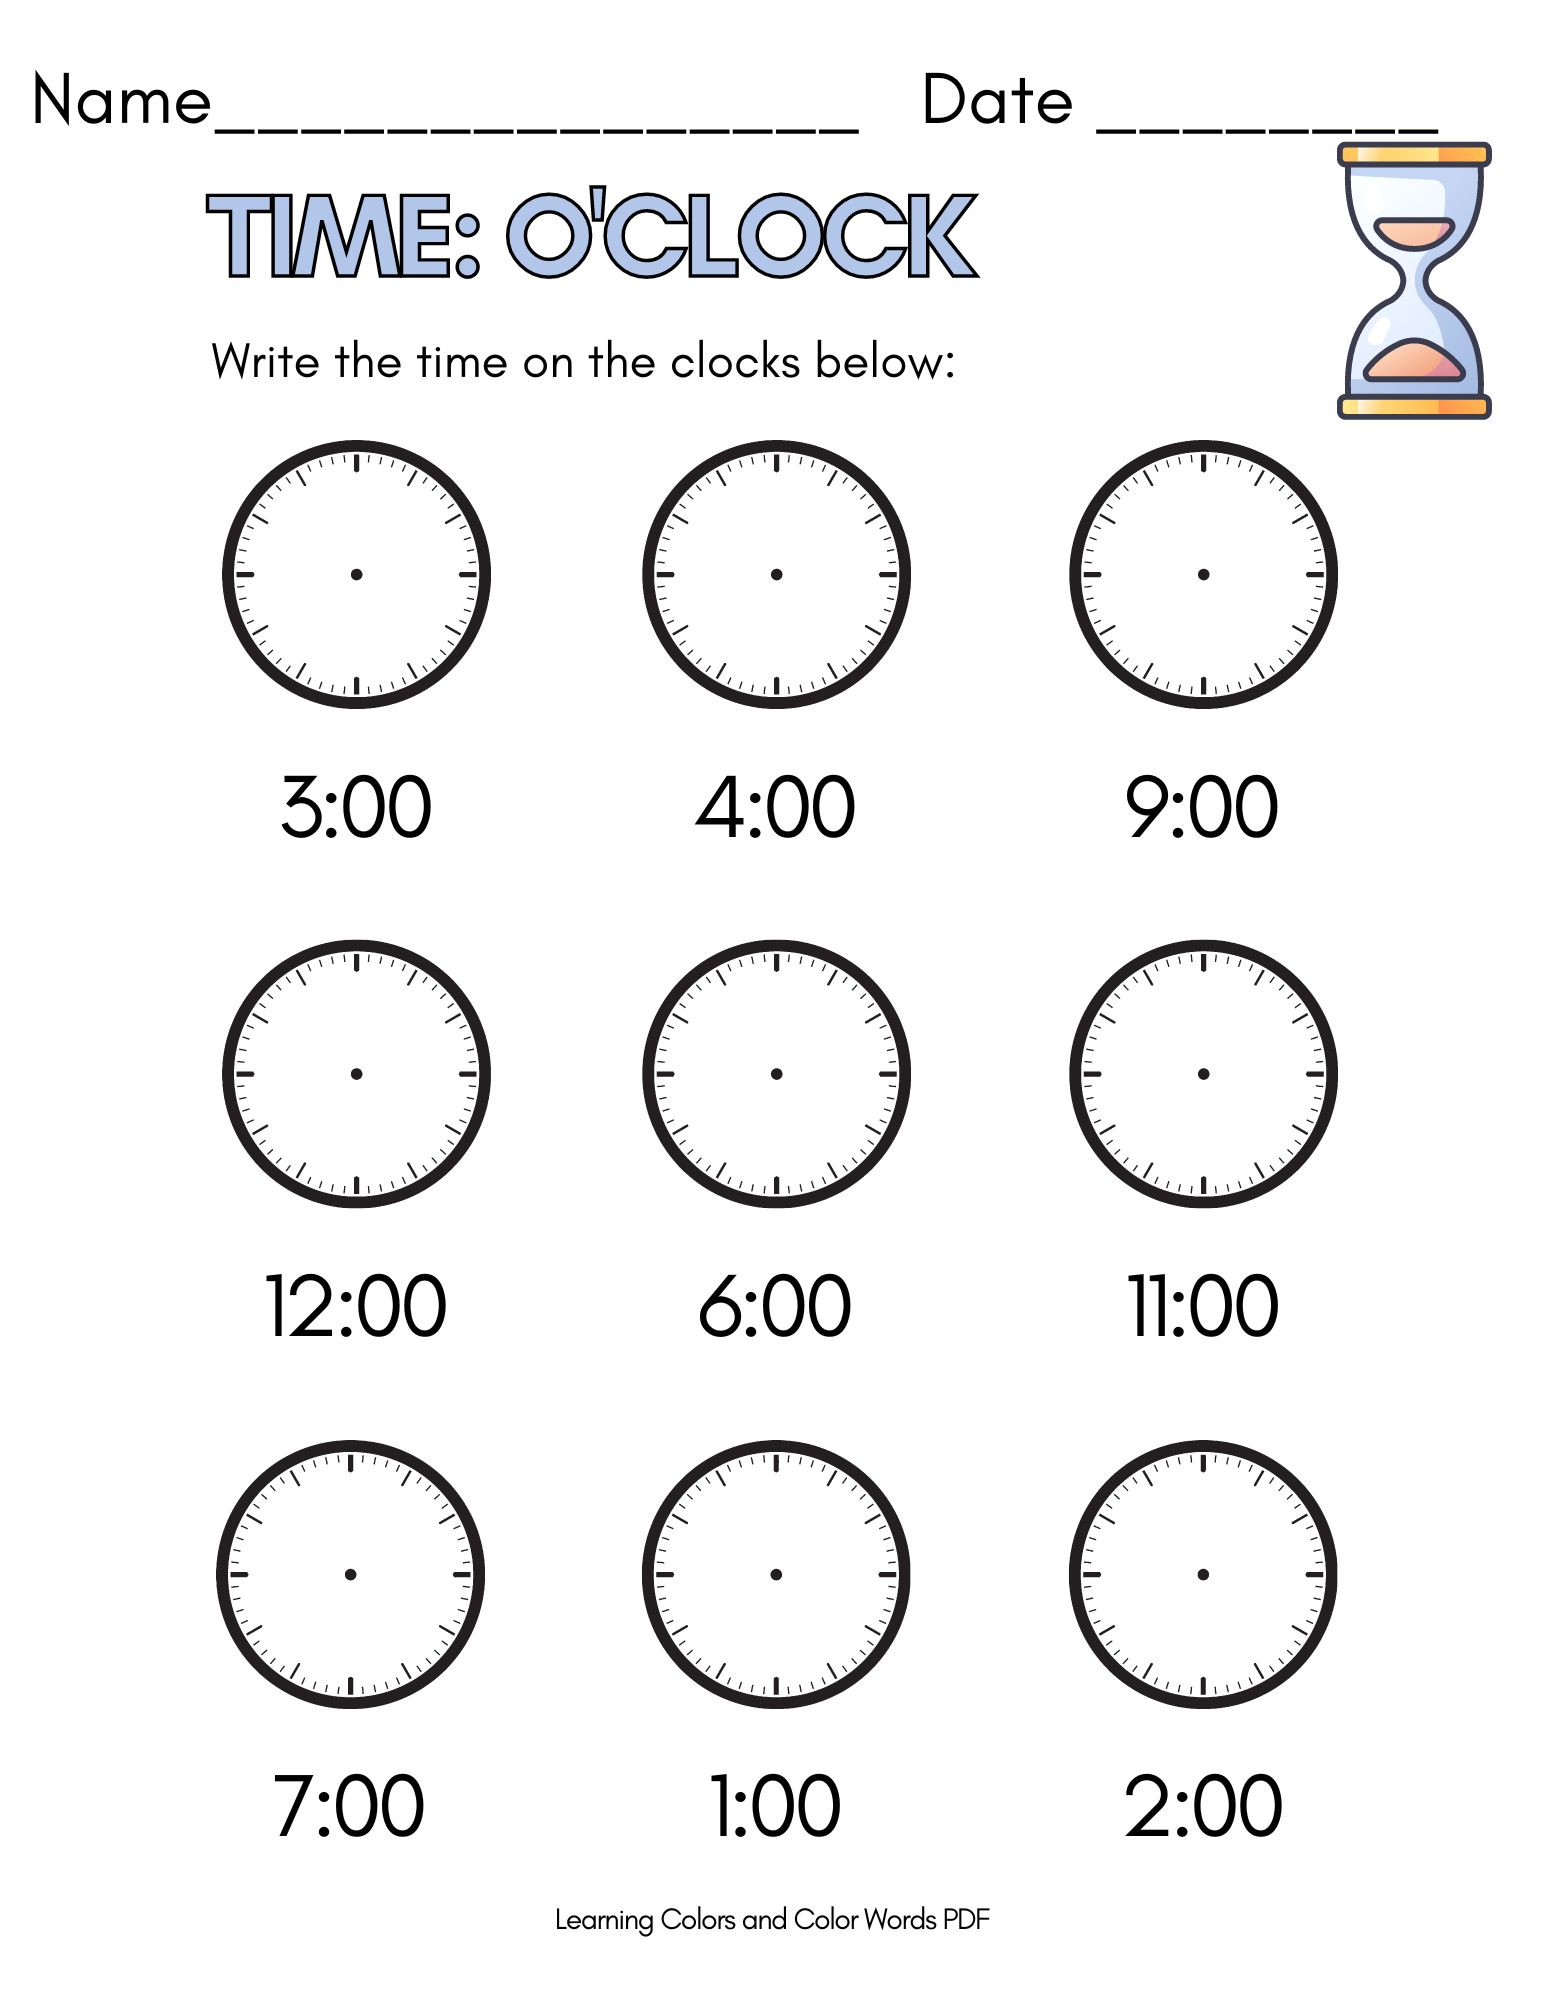 clock-worksheets-telling-time-to-the-hour-academy-worksheets